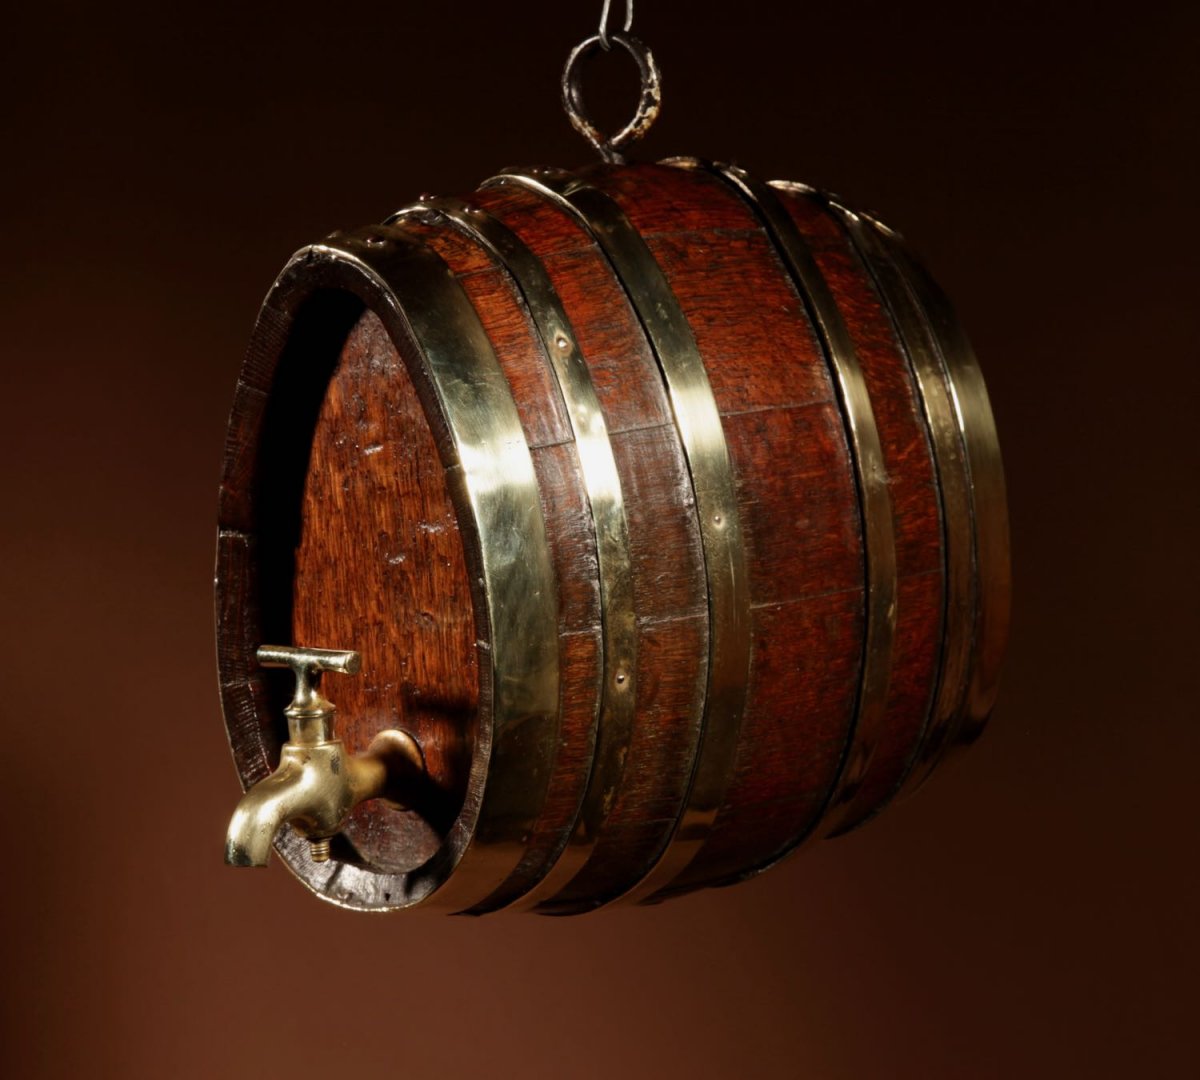  A Very Rare And Beautiful Coopered Oak And Brass Small Hanging Barrel.